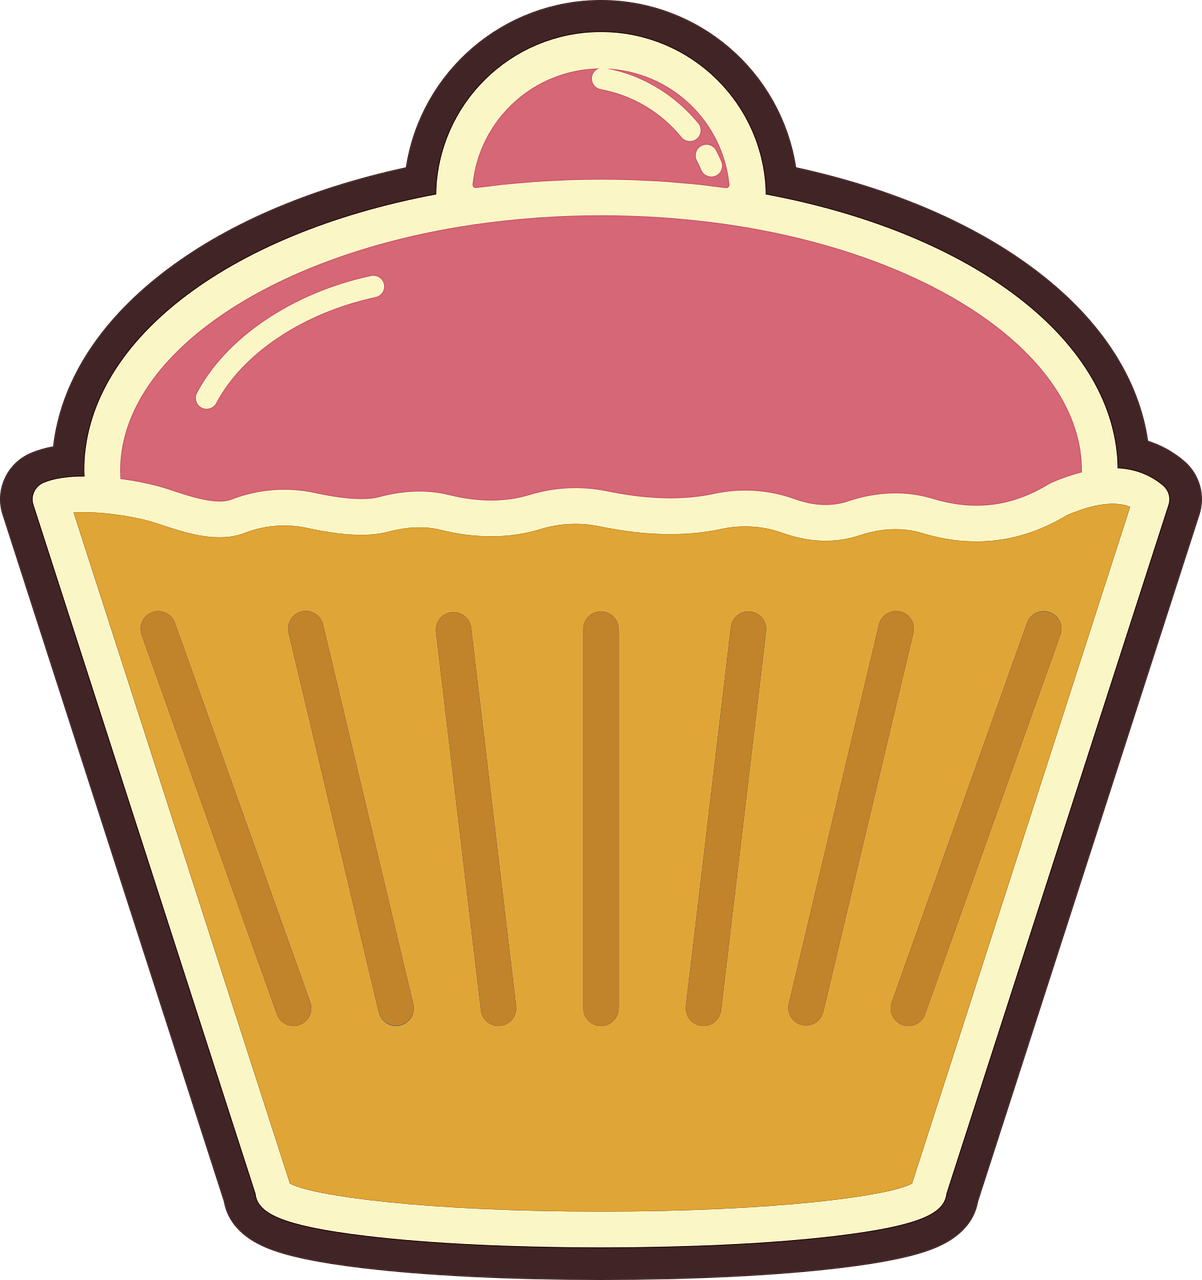 a cupcake with a cherry on top, a digital rendering, pop art, hero shot, icon, plain, with a black background